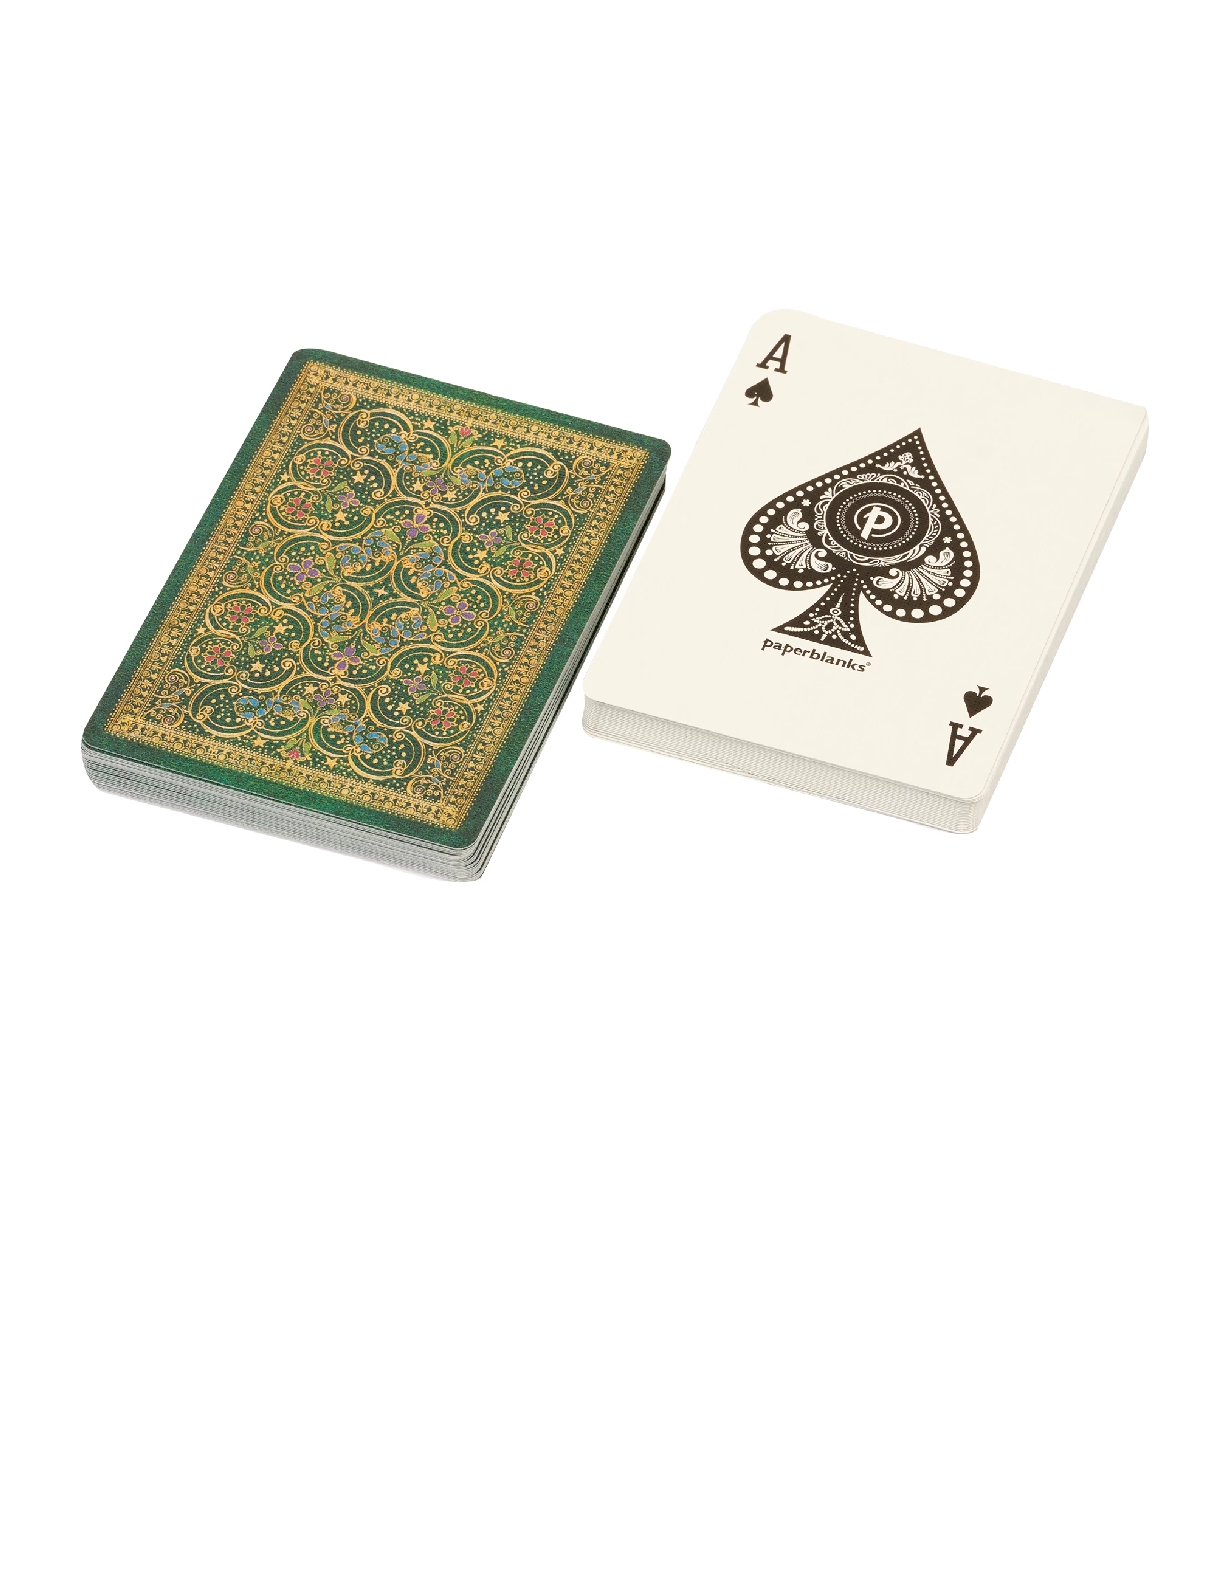 Pinnacle, The Queen's Binding, Playing Cards, Standard Deck